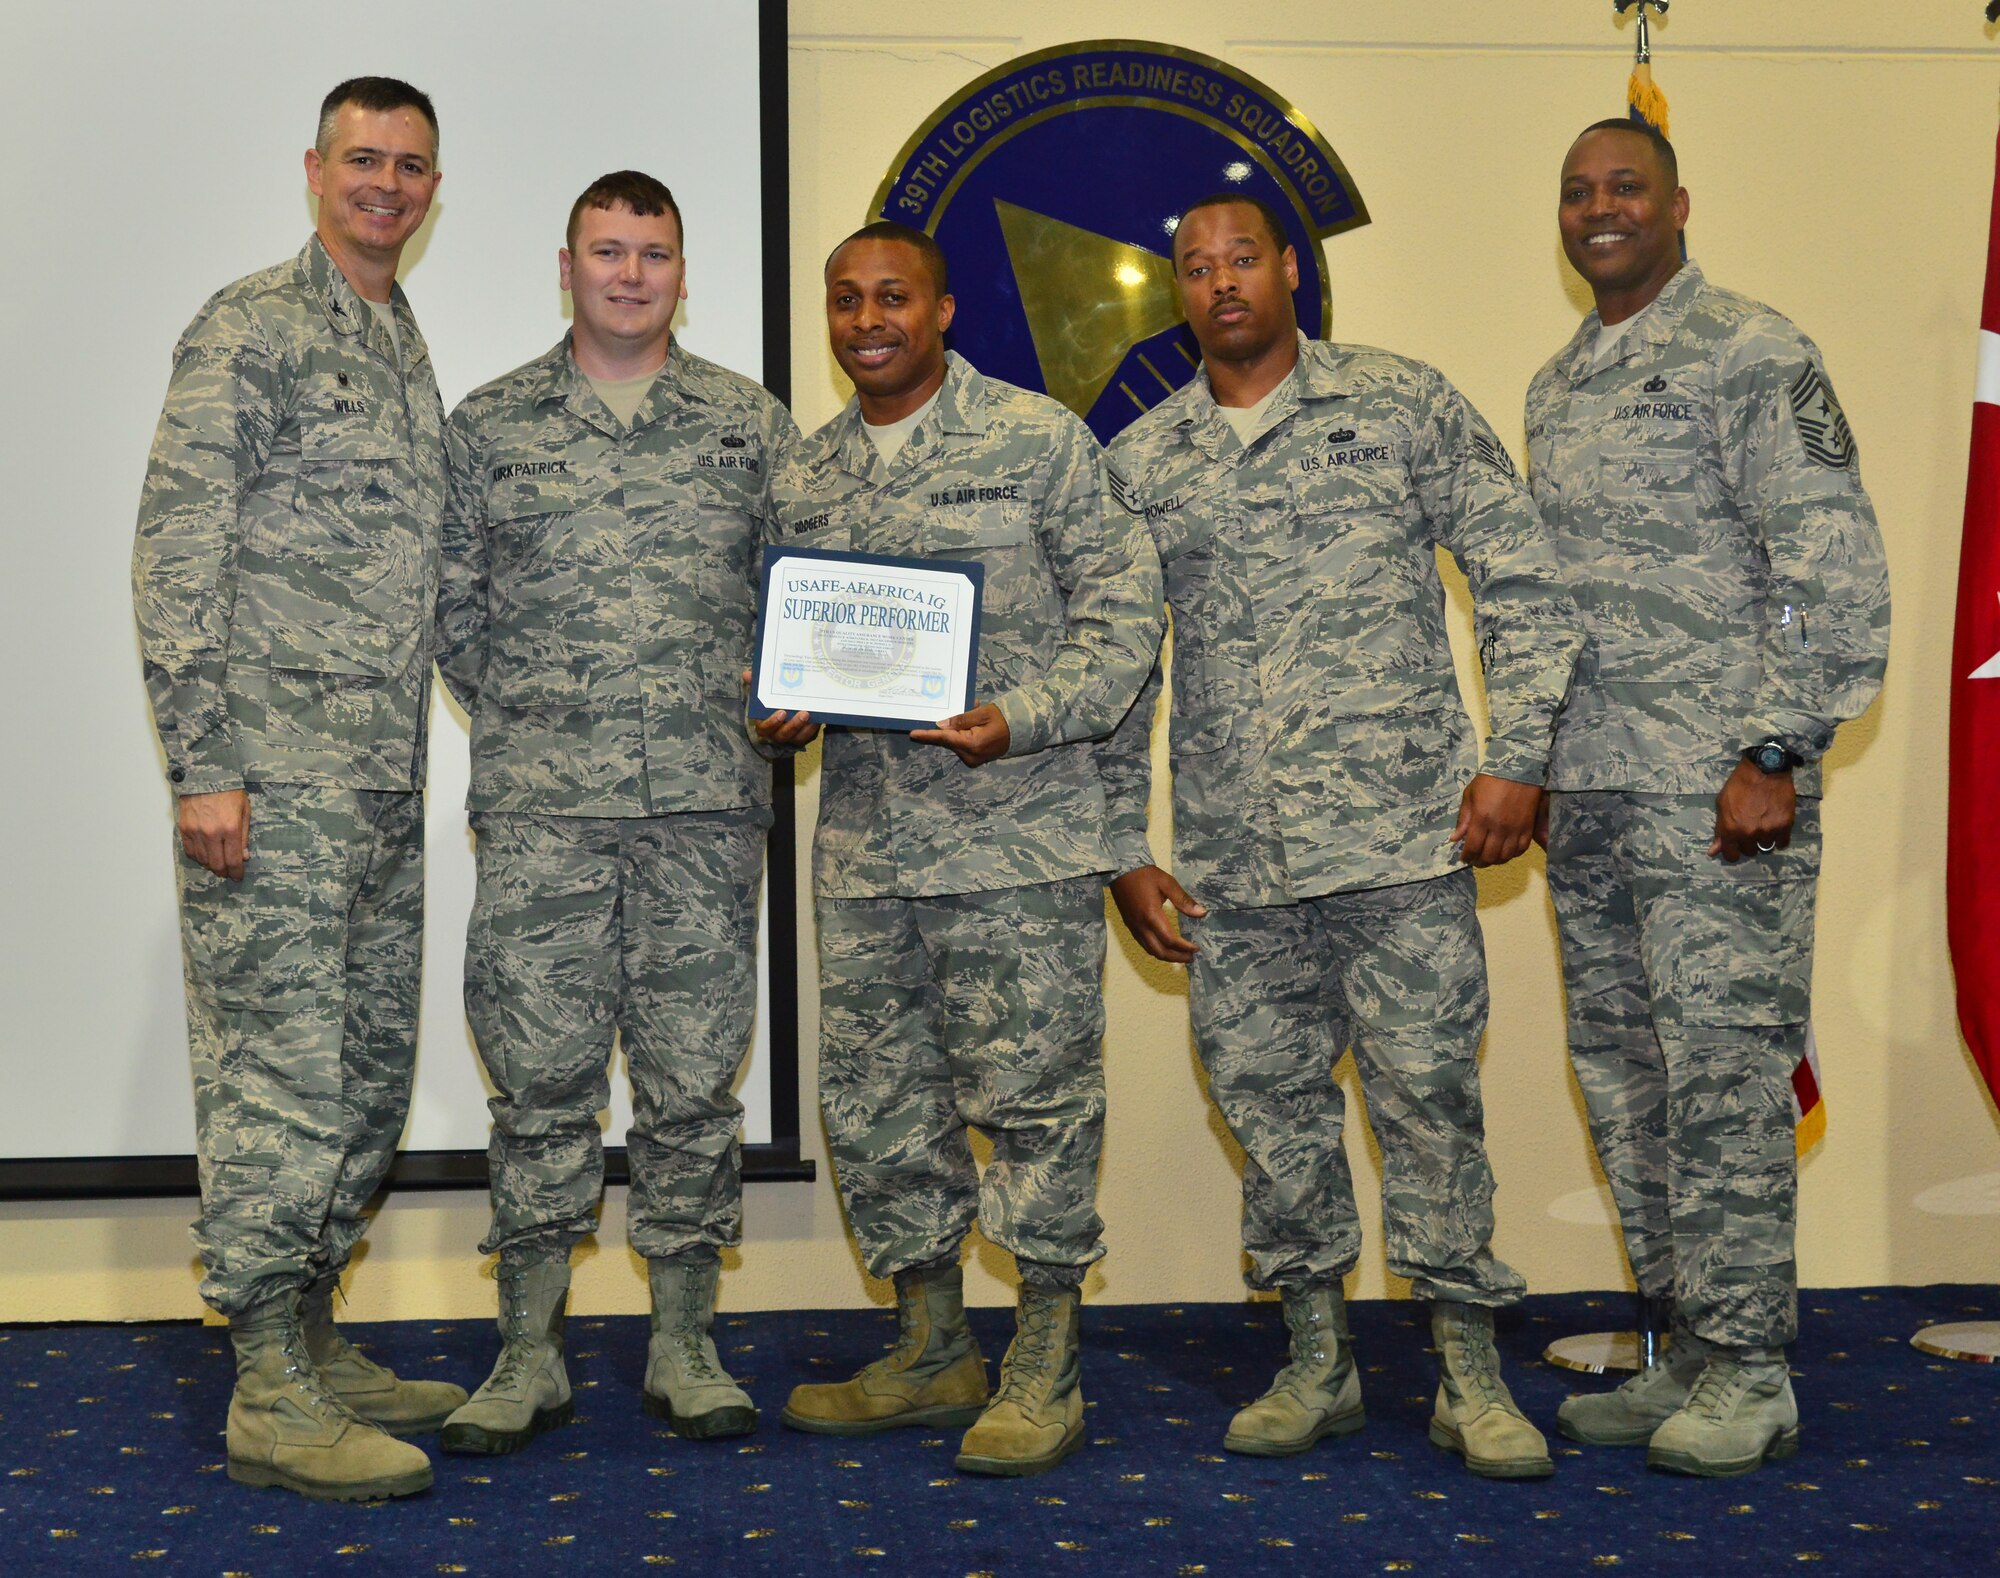 Members of the 39th Communications Squadron Quality Assurance work
center receive an award for Superior Team Performer from Col. Craig Wills,
39th Air Base Wing commander, and Chief Master Sgt. Anthony Johnson, 39th
ABW command chief, during an inspection outbrief May 5, 2014, Incirlik Air
Base, Turkey. The wing received a total of two United States Air Forces in
Europe Inspector General awards, 16 superior performer awards and eight team
awards. (U.S. Air Force photo by Staff Sgt. Eric Summers Jr./Released)
